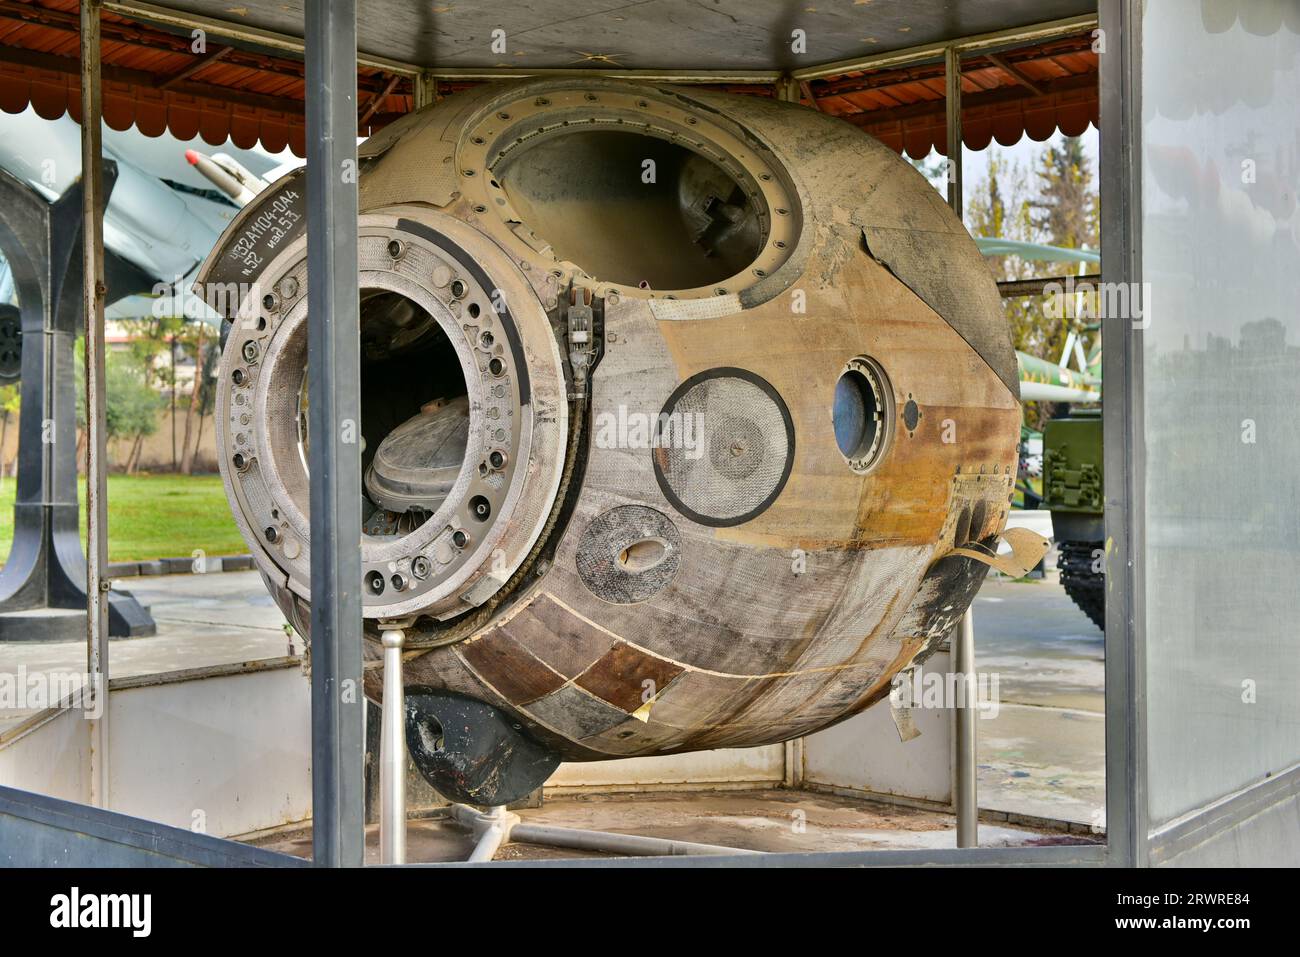 Wreckage of the Soviet Soyuz space capsule on display outside the October War Panorama in Damascus, Syria Stock Photo